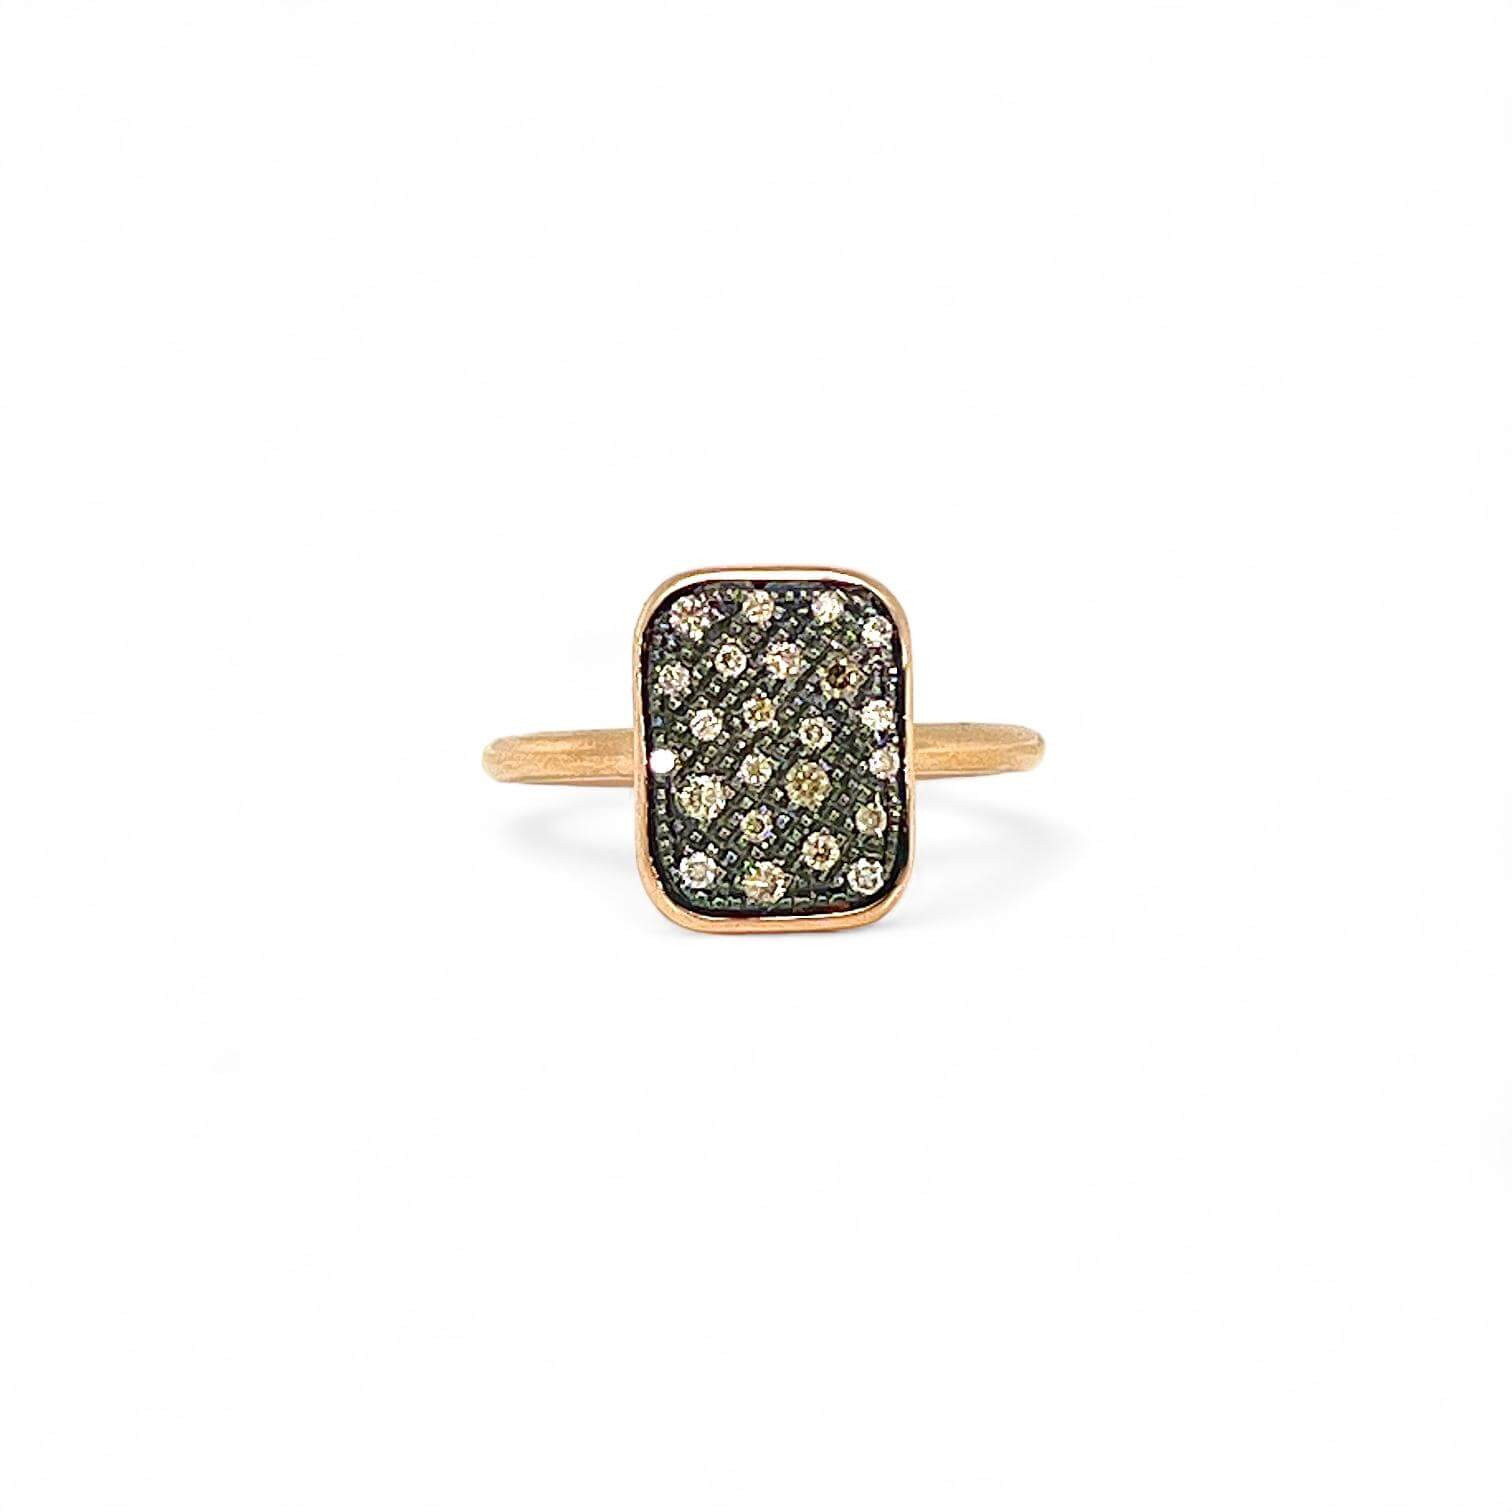 TOPPINA rose gold and diamond ring Art. 7774BW